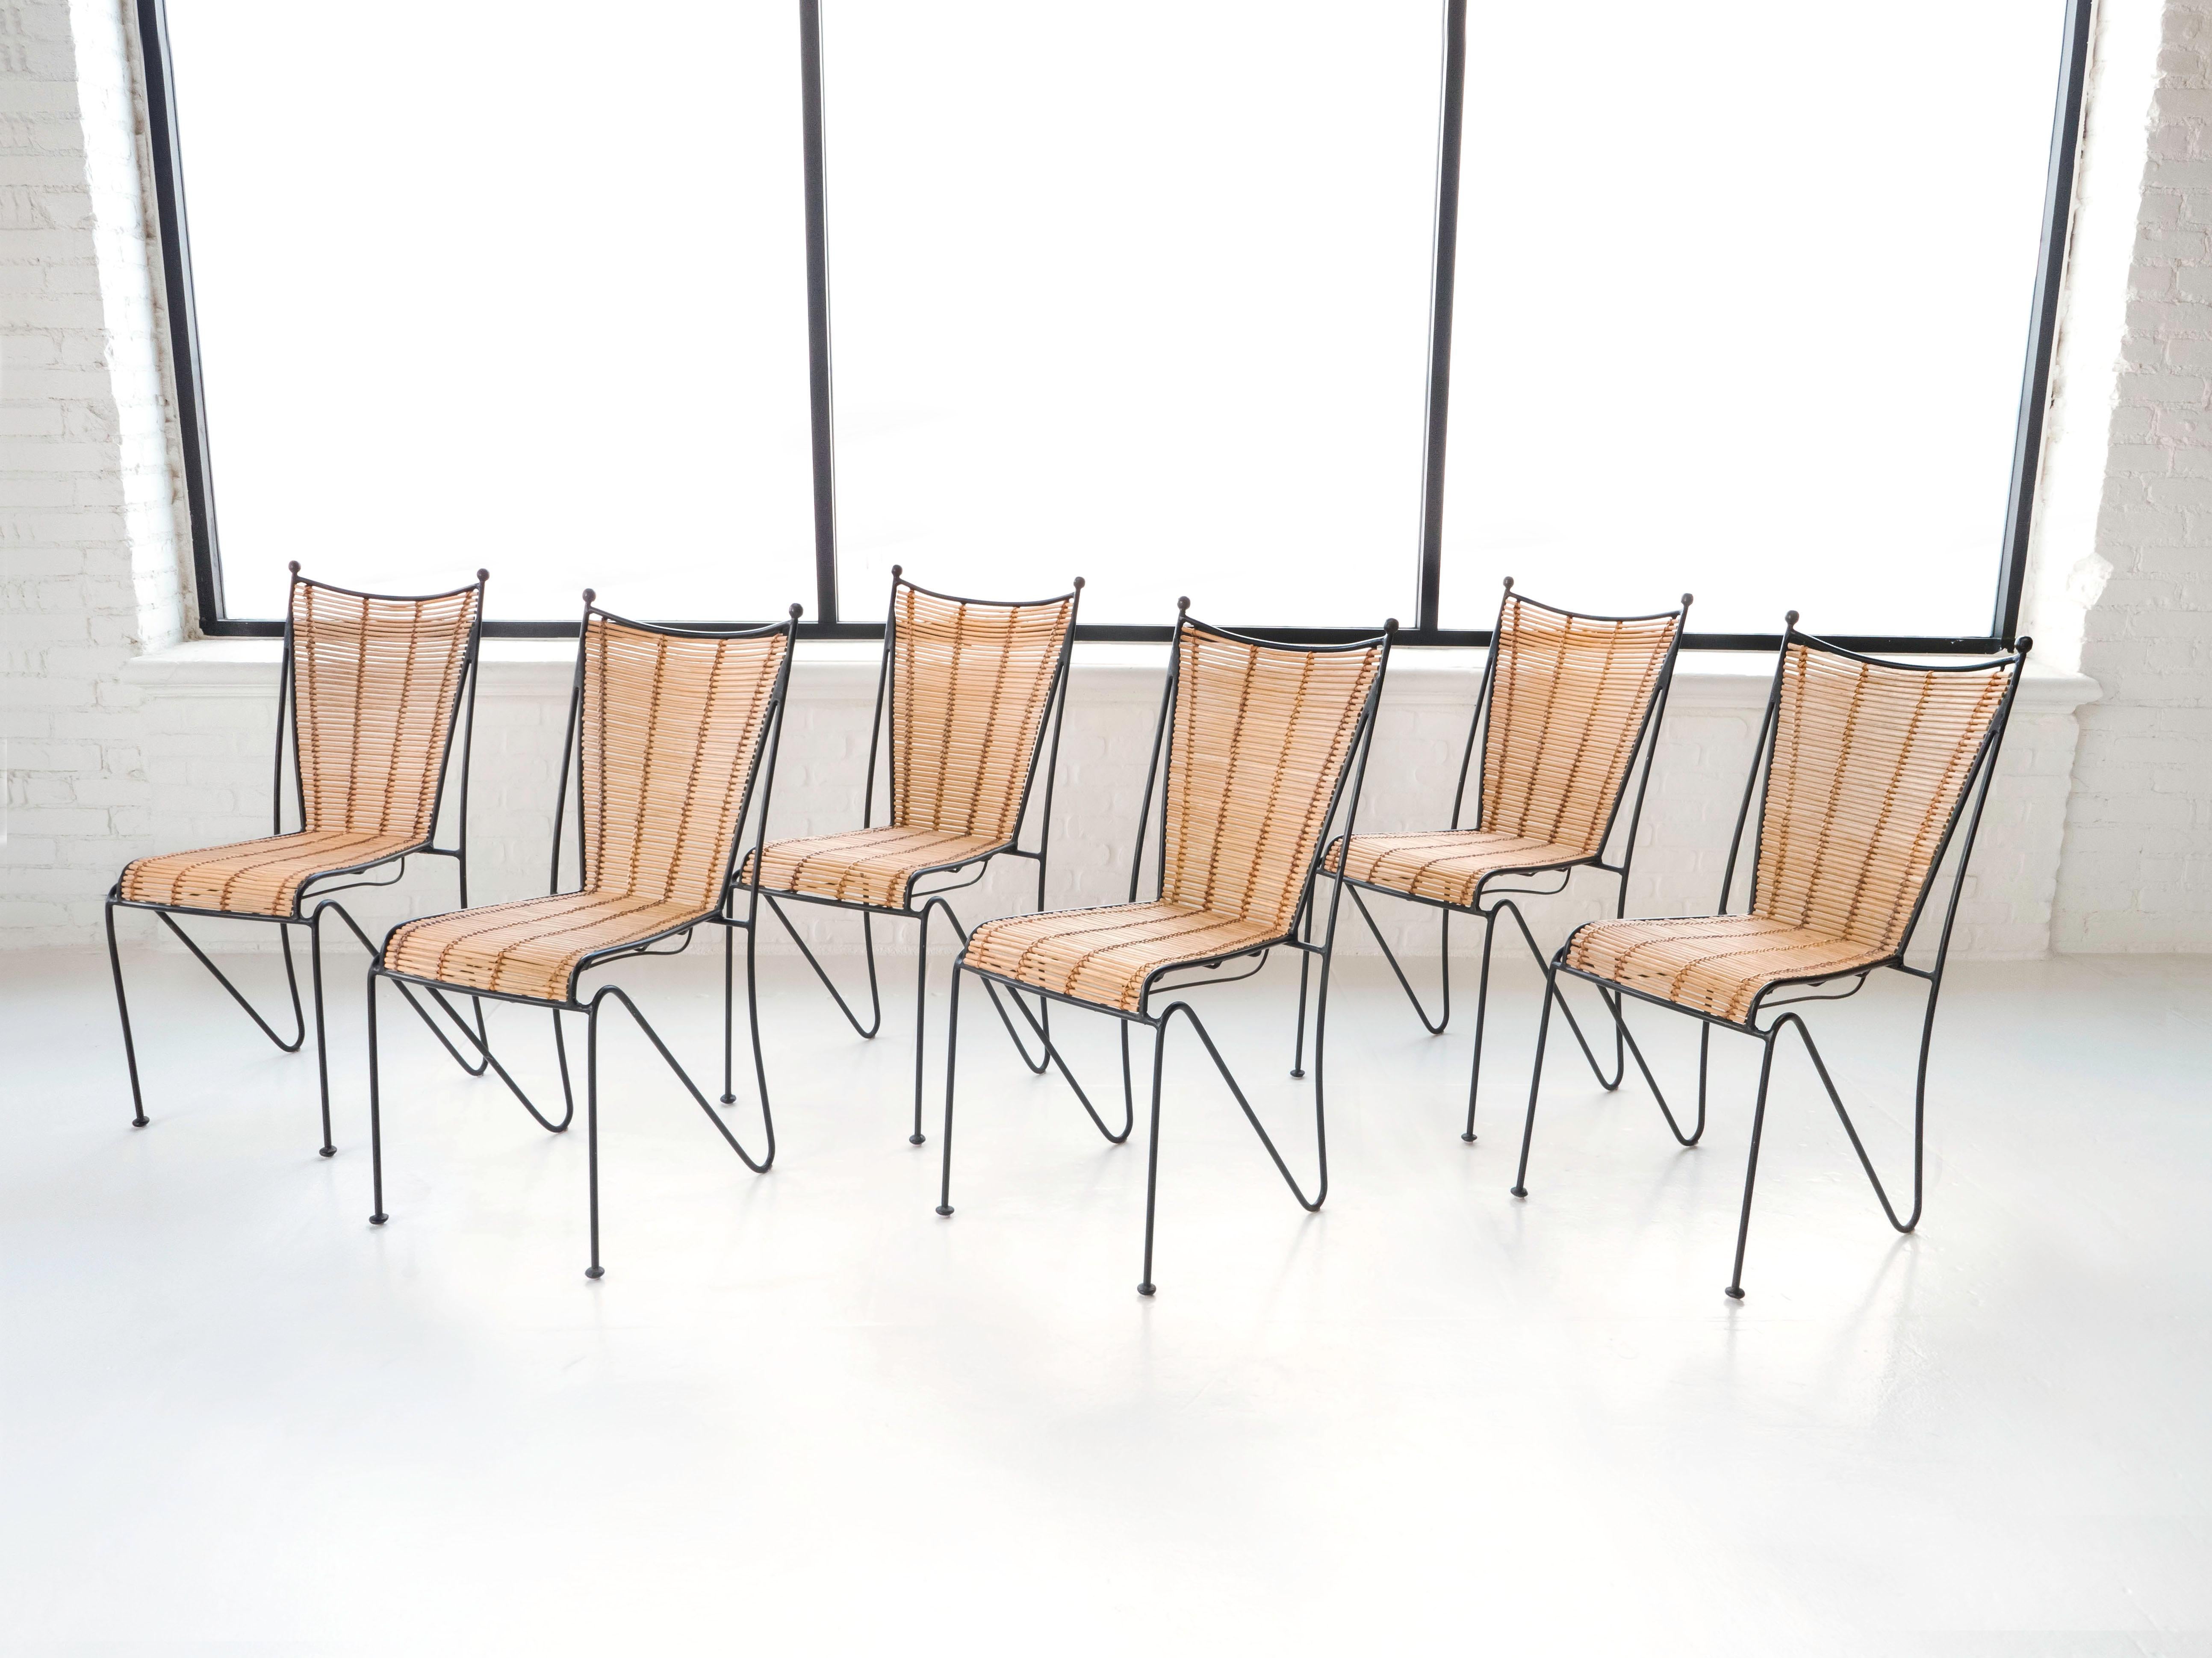 Set of 6 indoor / outdoor dining chairs by designer Pipsan Saarinen Swanson for Ficks Reed. Made out of welded iron frames and rattan, circa 1950s. These chairs are in very nice original condition. 

The chairs show patina with no breaks in the